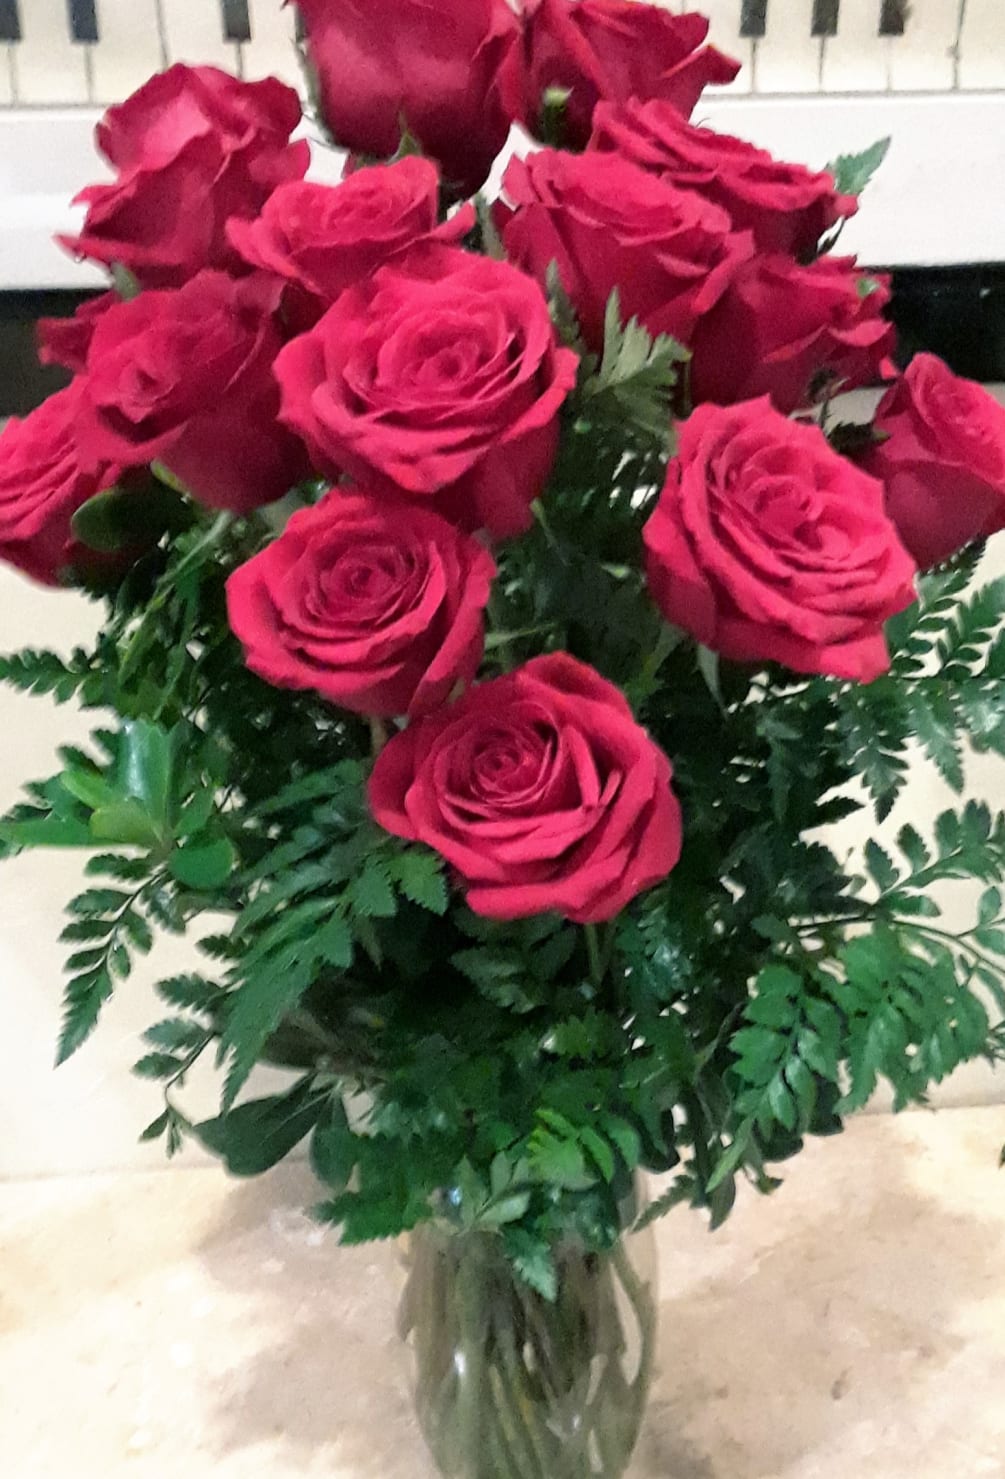 Order gorgeous red roses in red vase. Choose from 12, 18, or